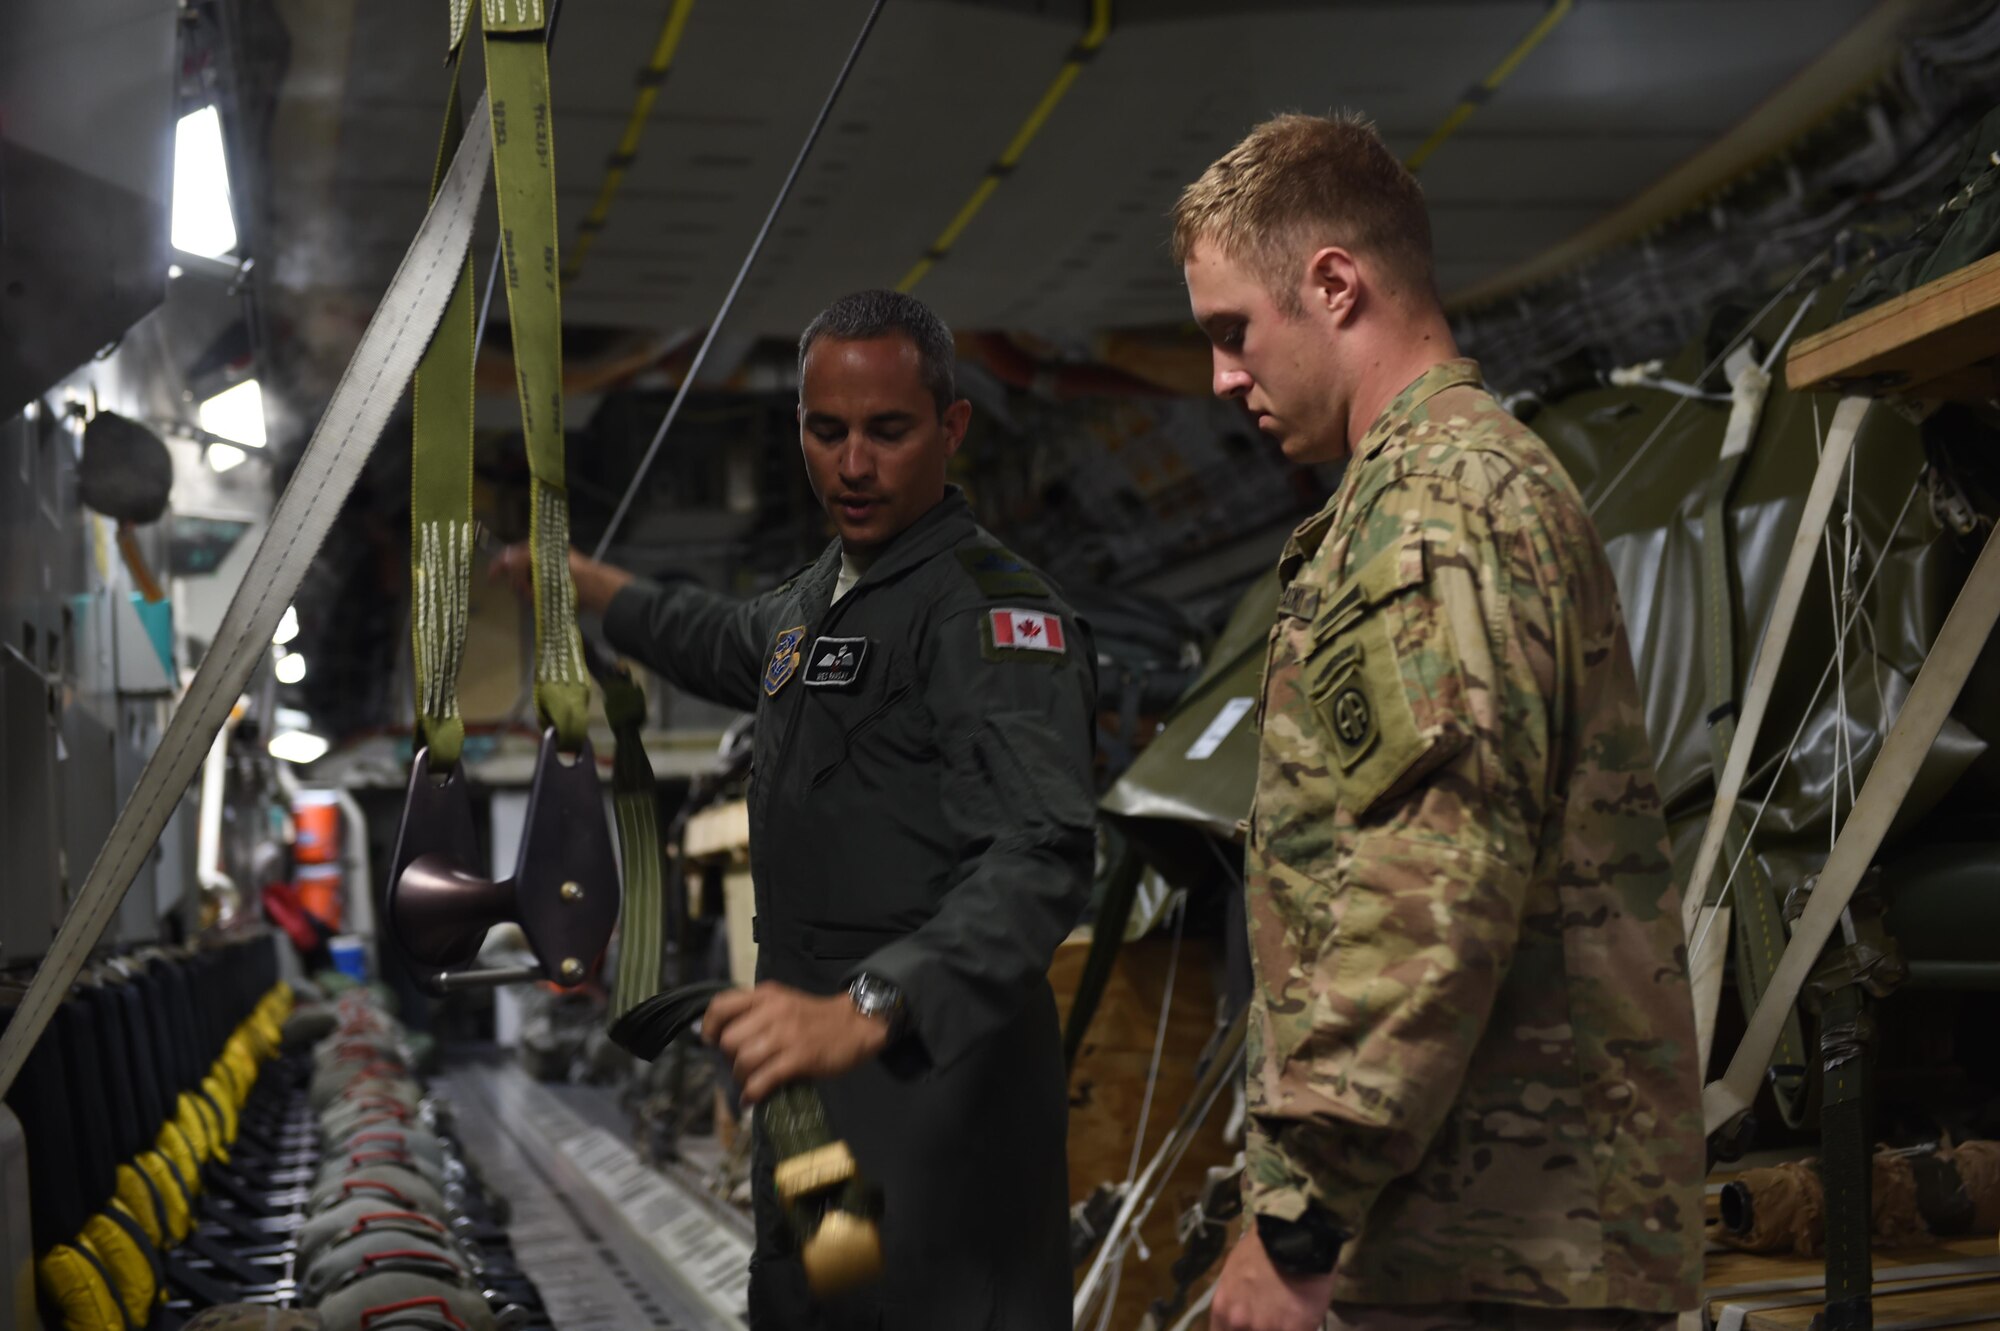 Royal Canadian Air Force Sgt. Wes Ramsay, 8th Airlift Squadron C-17 Globemaster III loadmaster instructs Army Capt. Justin Schumaker, Headquarters and Headquarters Company, 1st Brigade, 82nd Airborne Division, on the rigging set up inside a C-17 at Pope Army Air Field, N.C., on June 6, 2016. Three 62nd Airlift Wing C-17’s flew to Poland to conduct equipment and personnel air drops in support of Exercise Swift Response 2016. (Air Force photo/Staff Sgt. Naomi Shipley)
 
